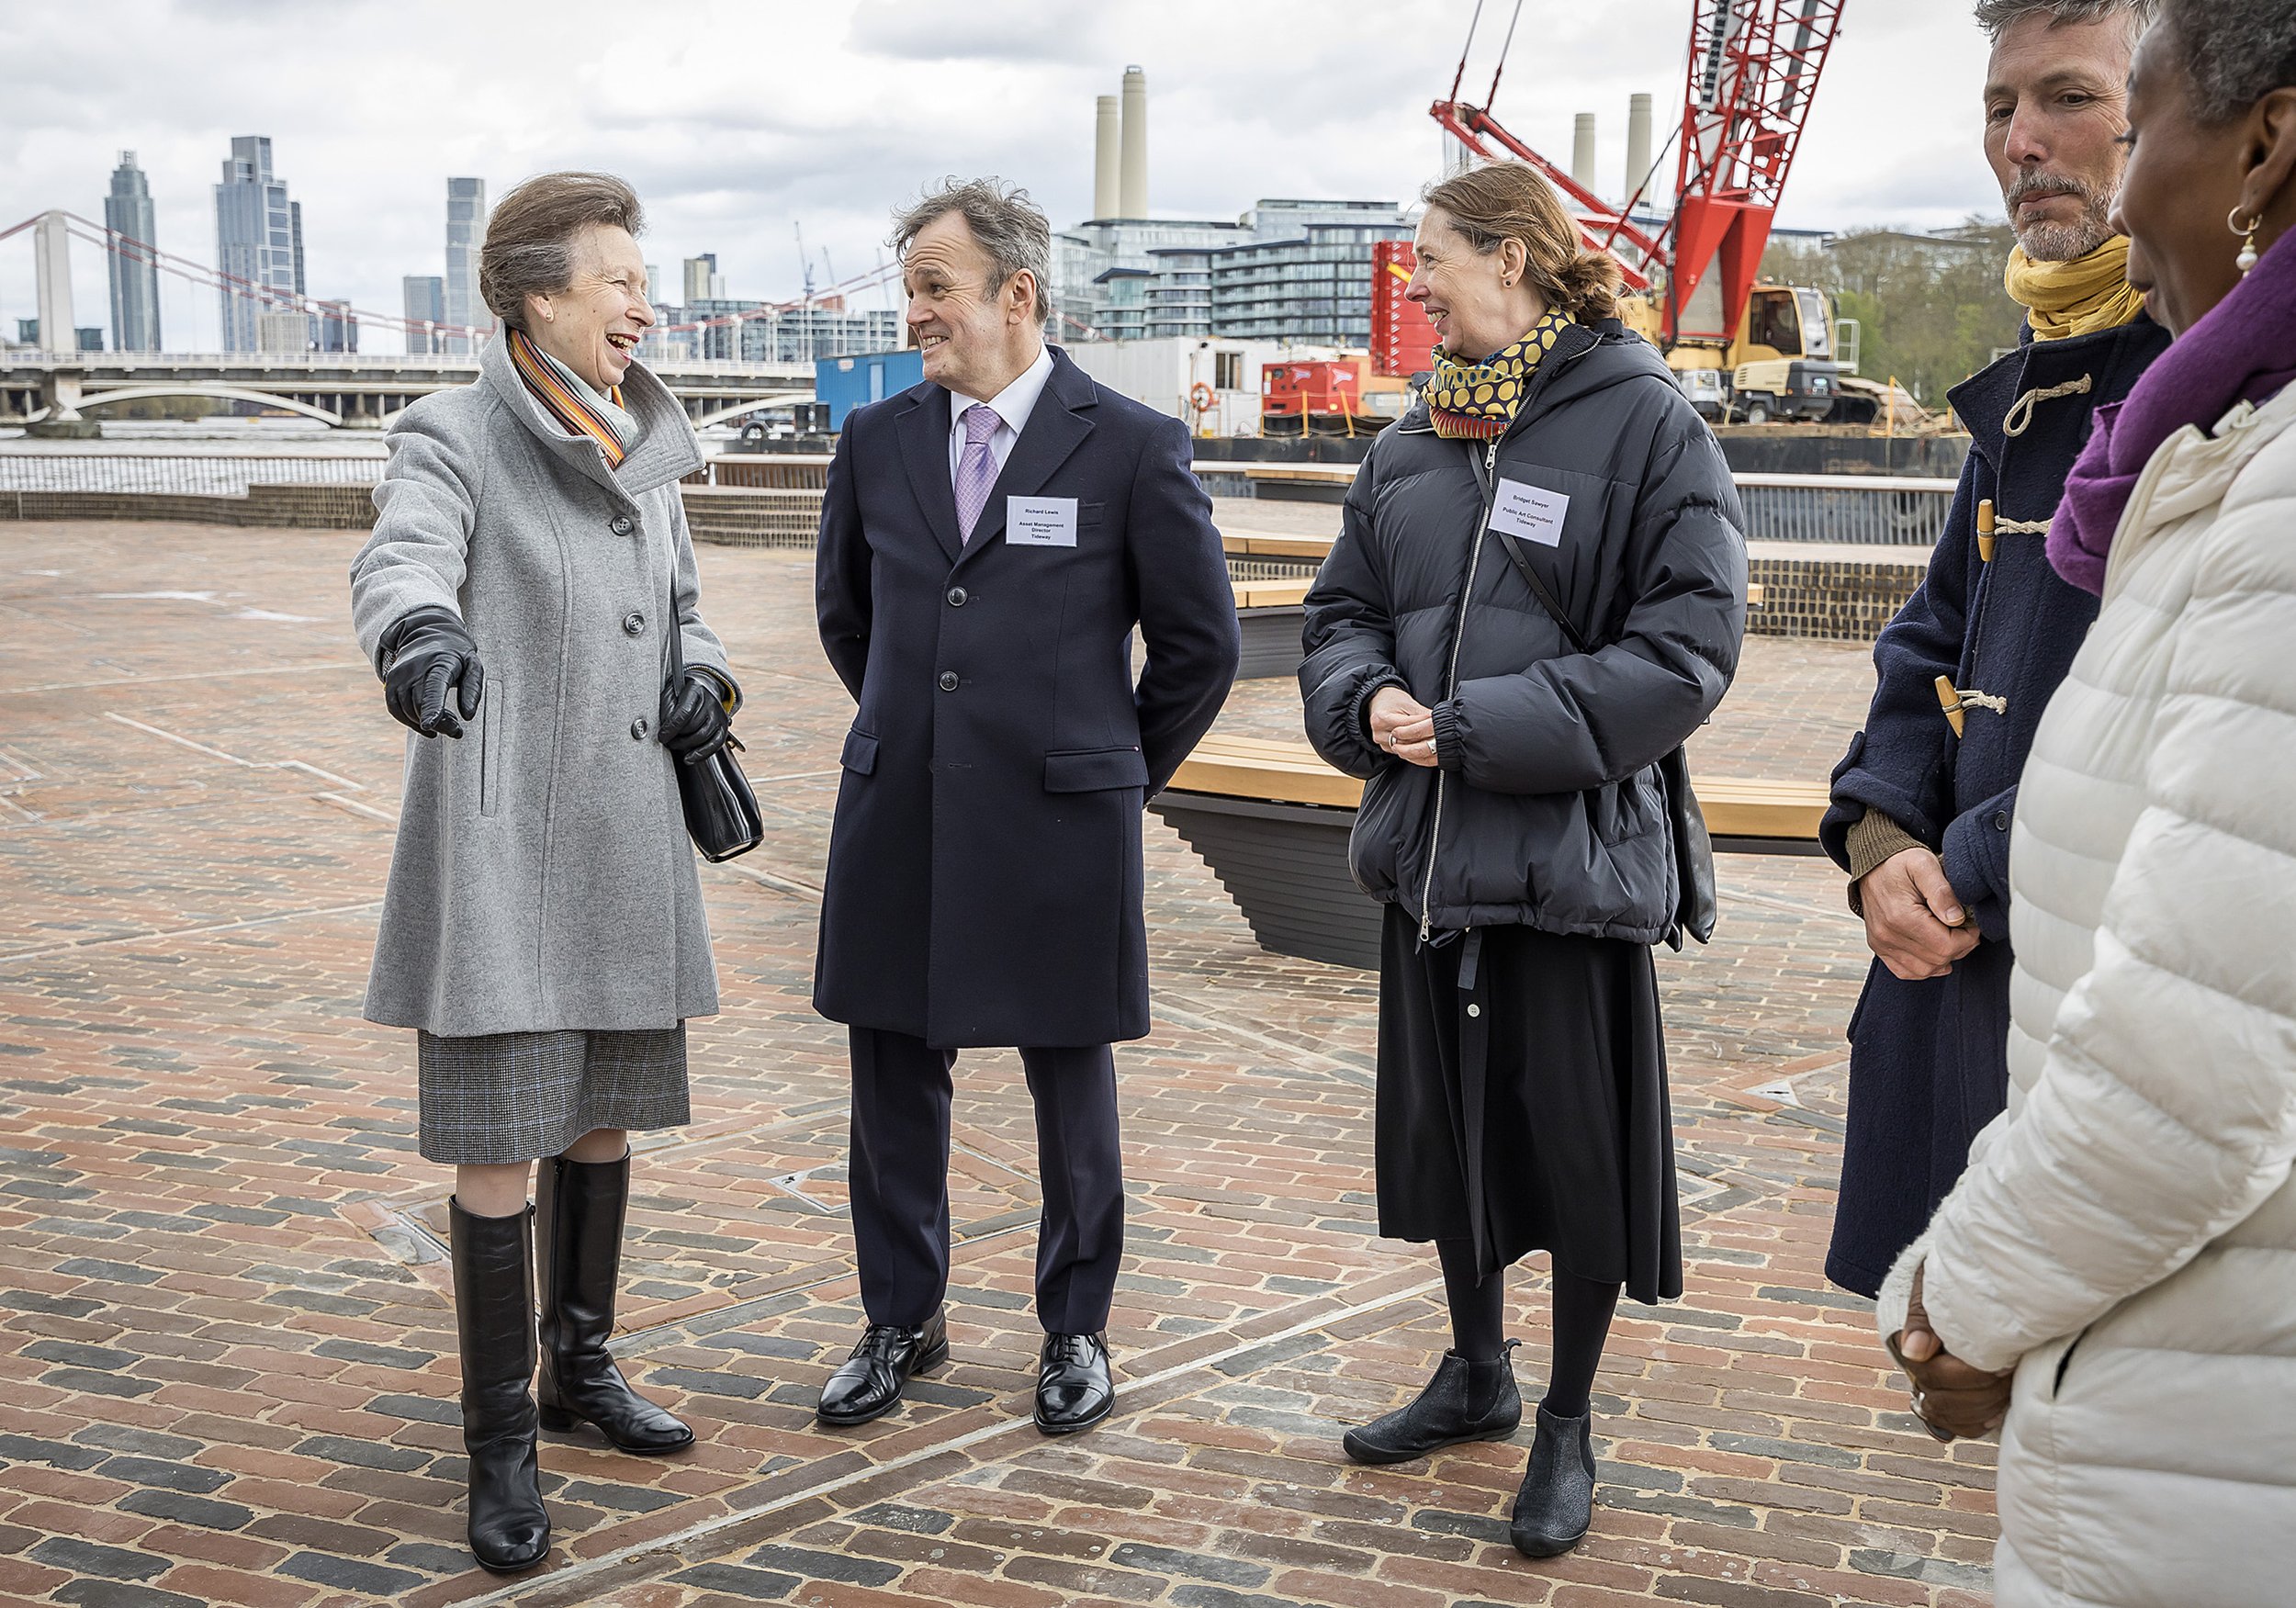 Opening event, HRH The Princess Royal. Photo courtesy of Tideway